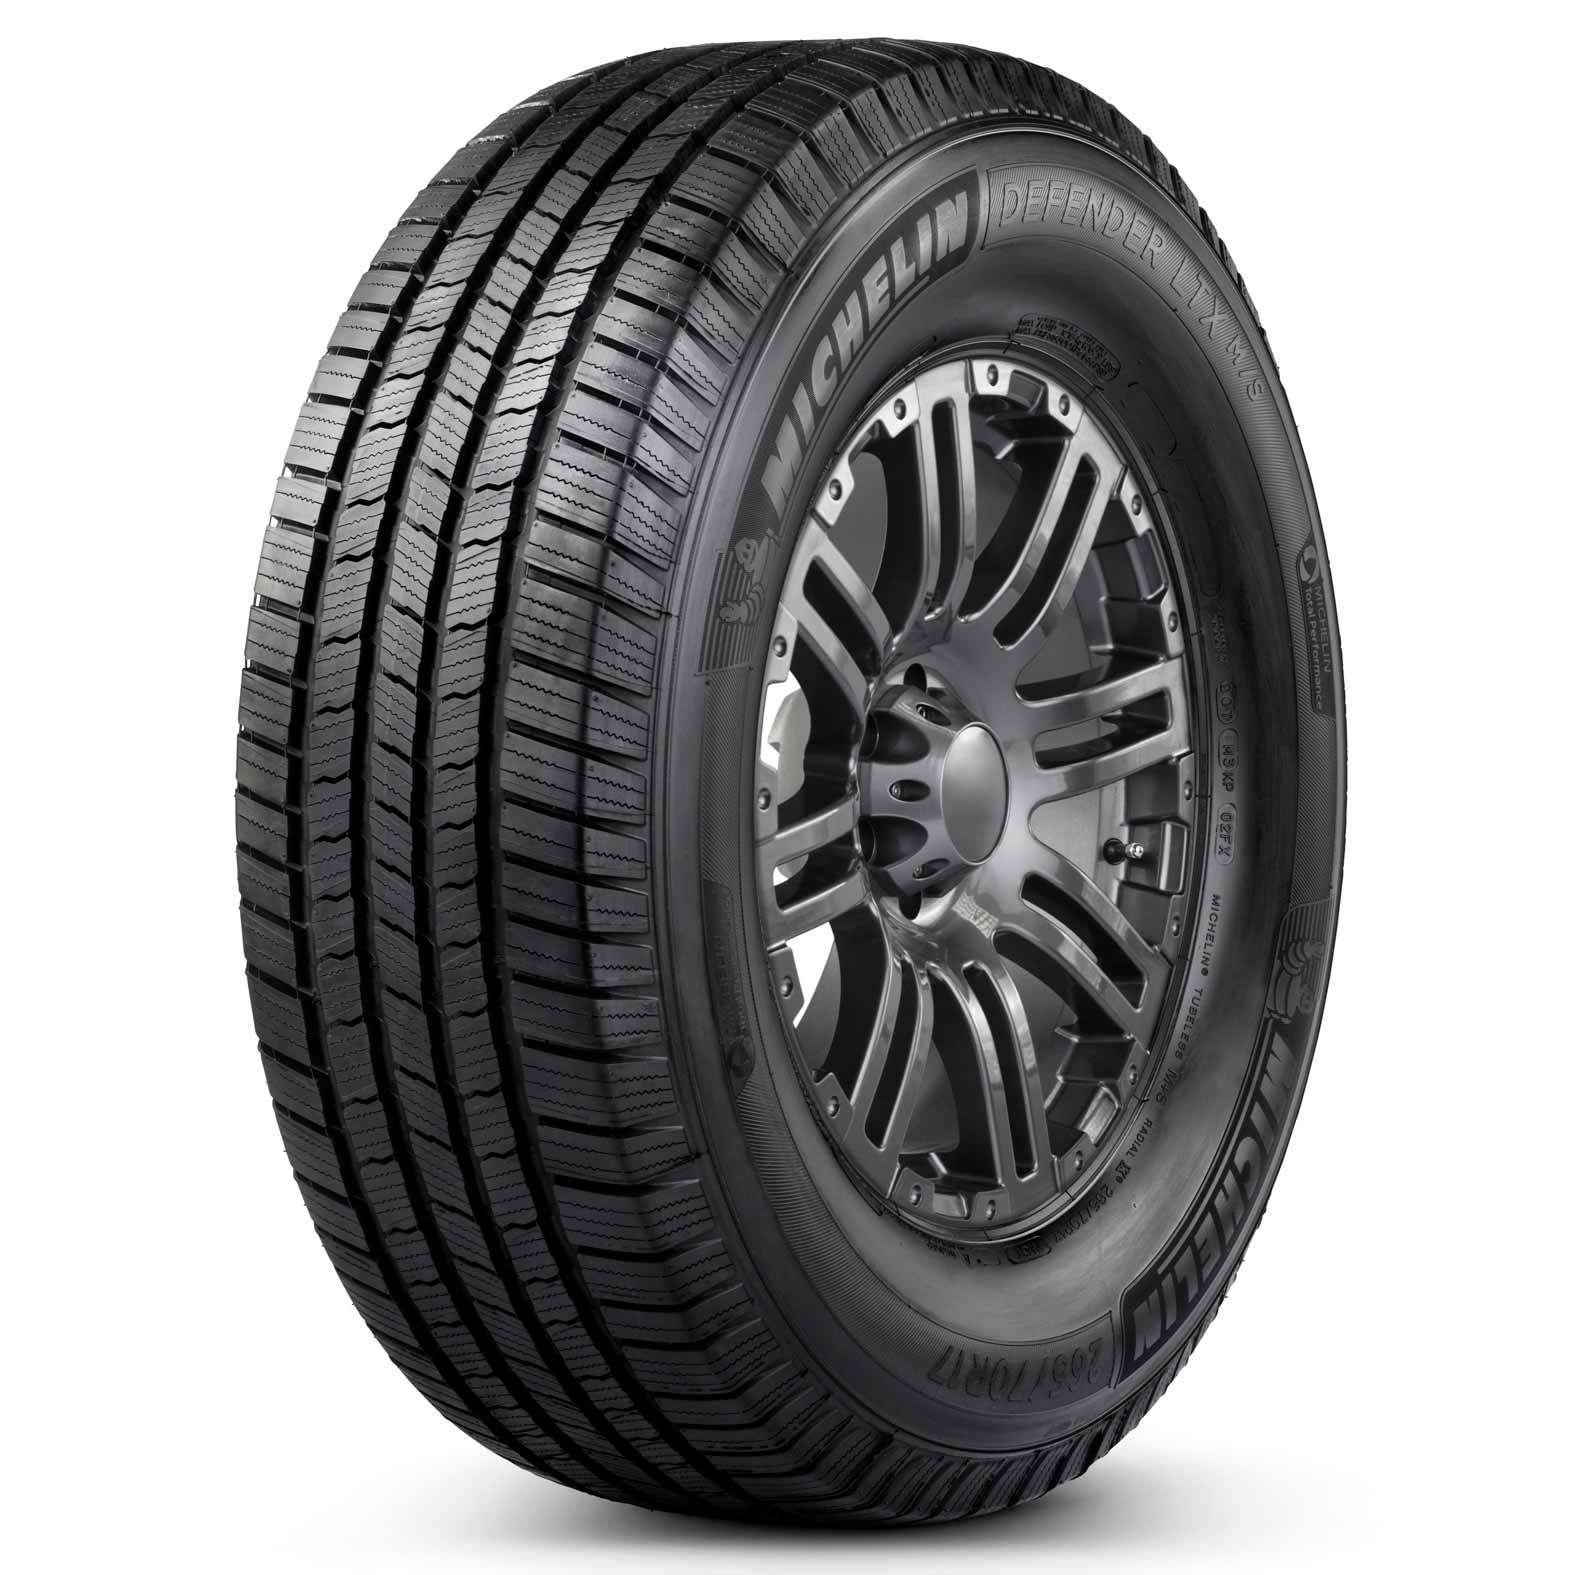 michelin-defender-ltx-ms-tire-reviews-and-tests